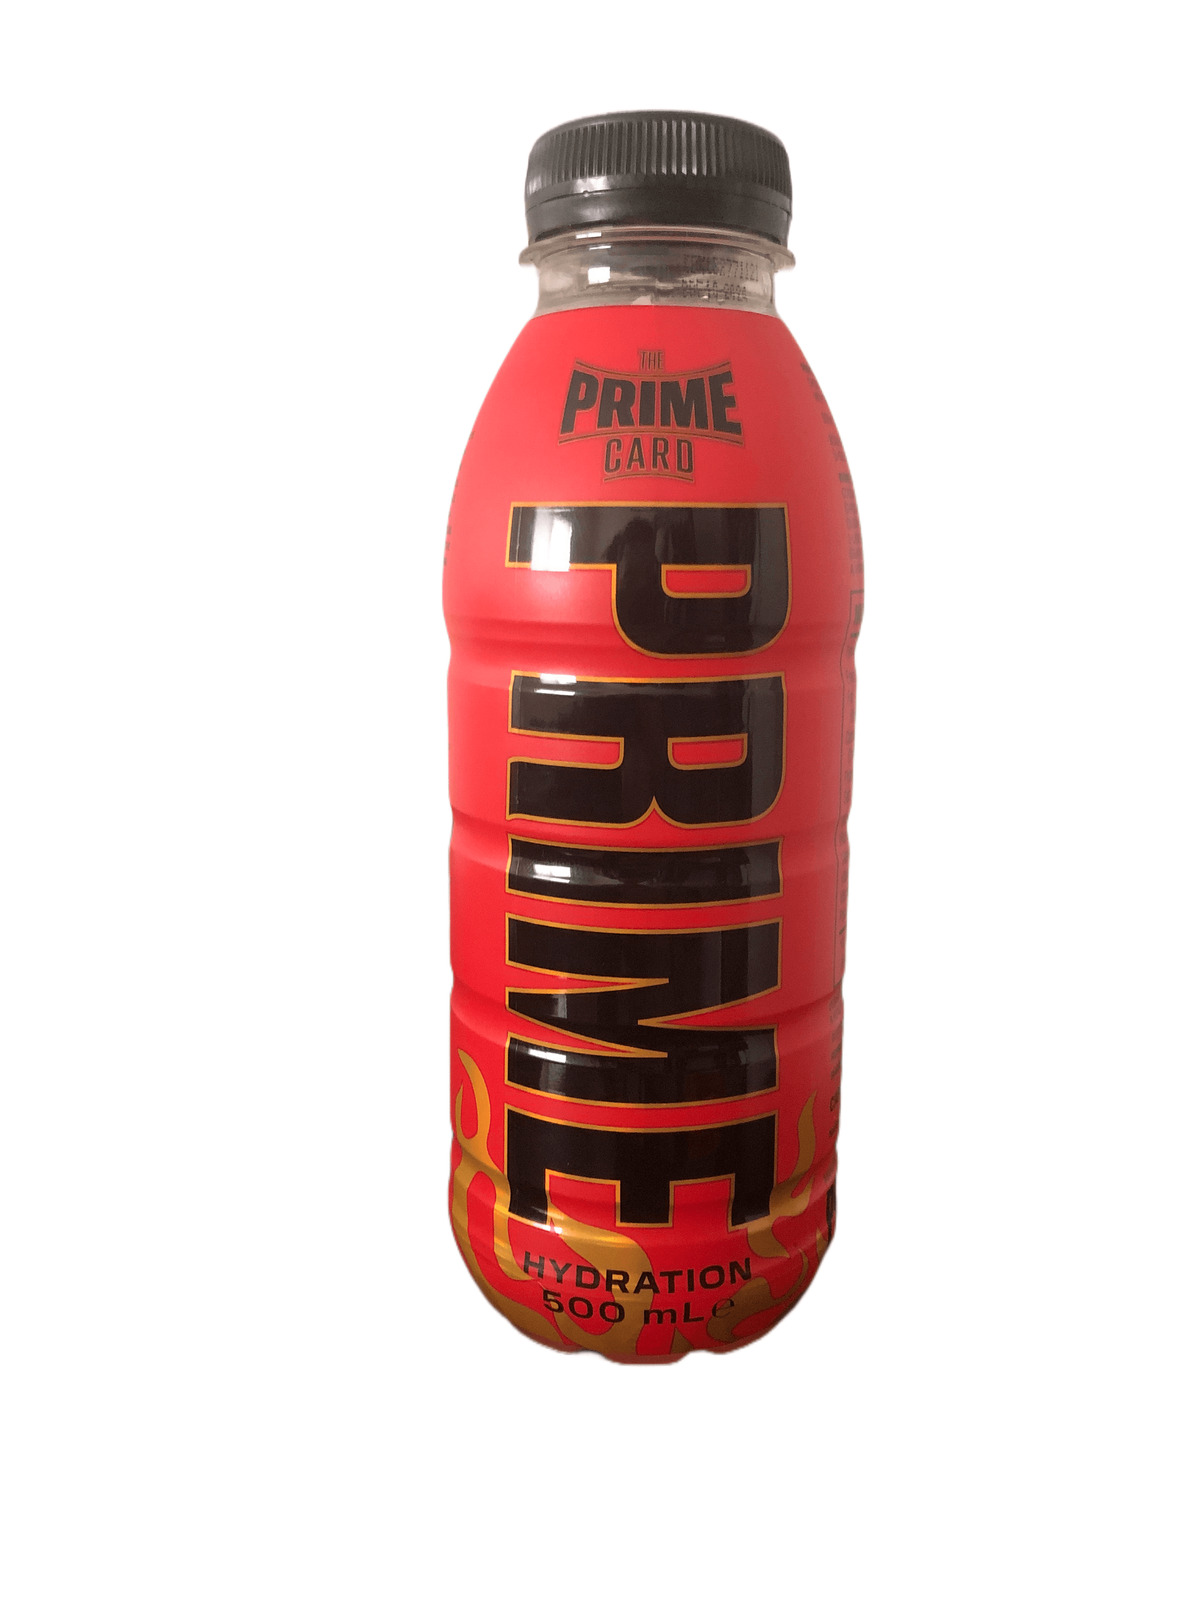 Prime Hydration Prime Card Red Bottle Misfits Collectable Edition